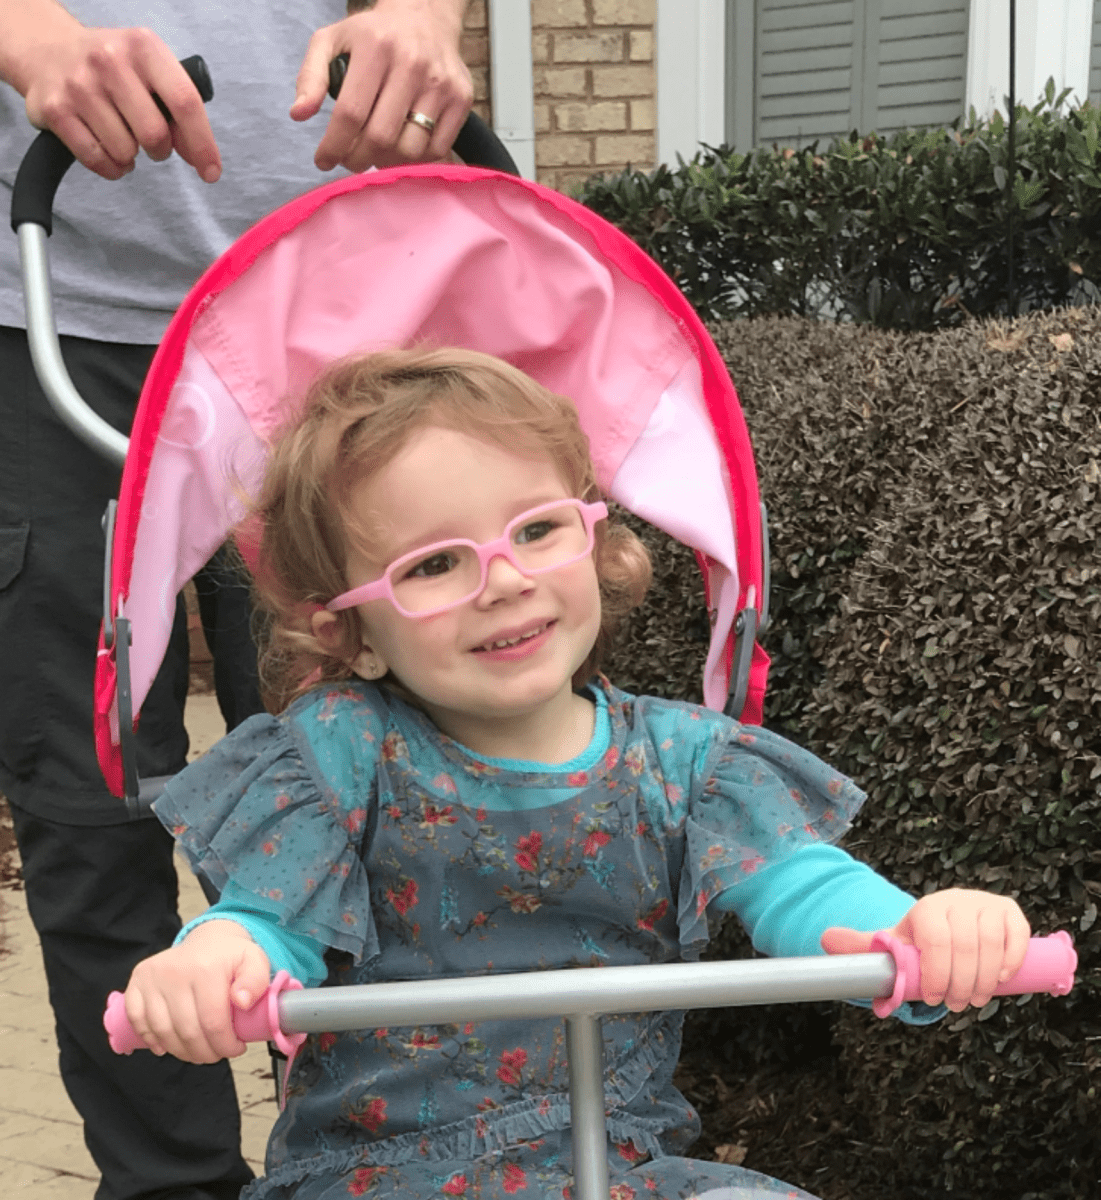 A photo of a small child named Charlotte with glasses